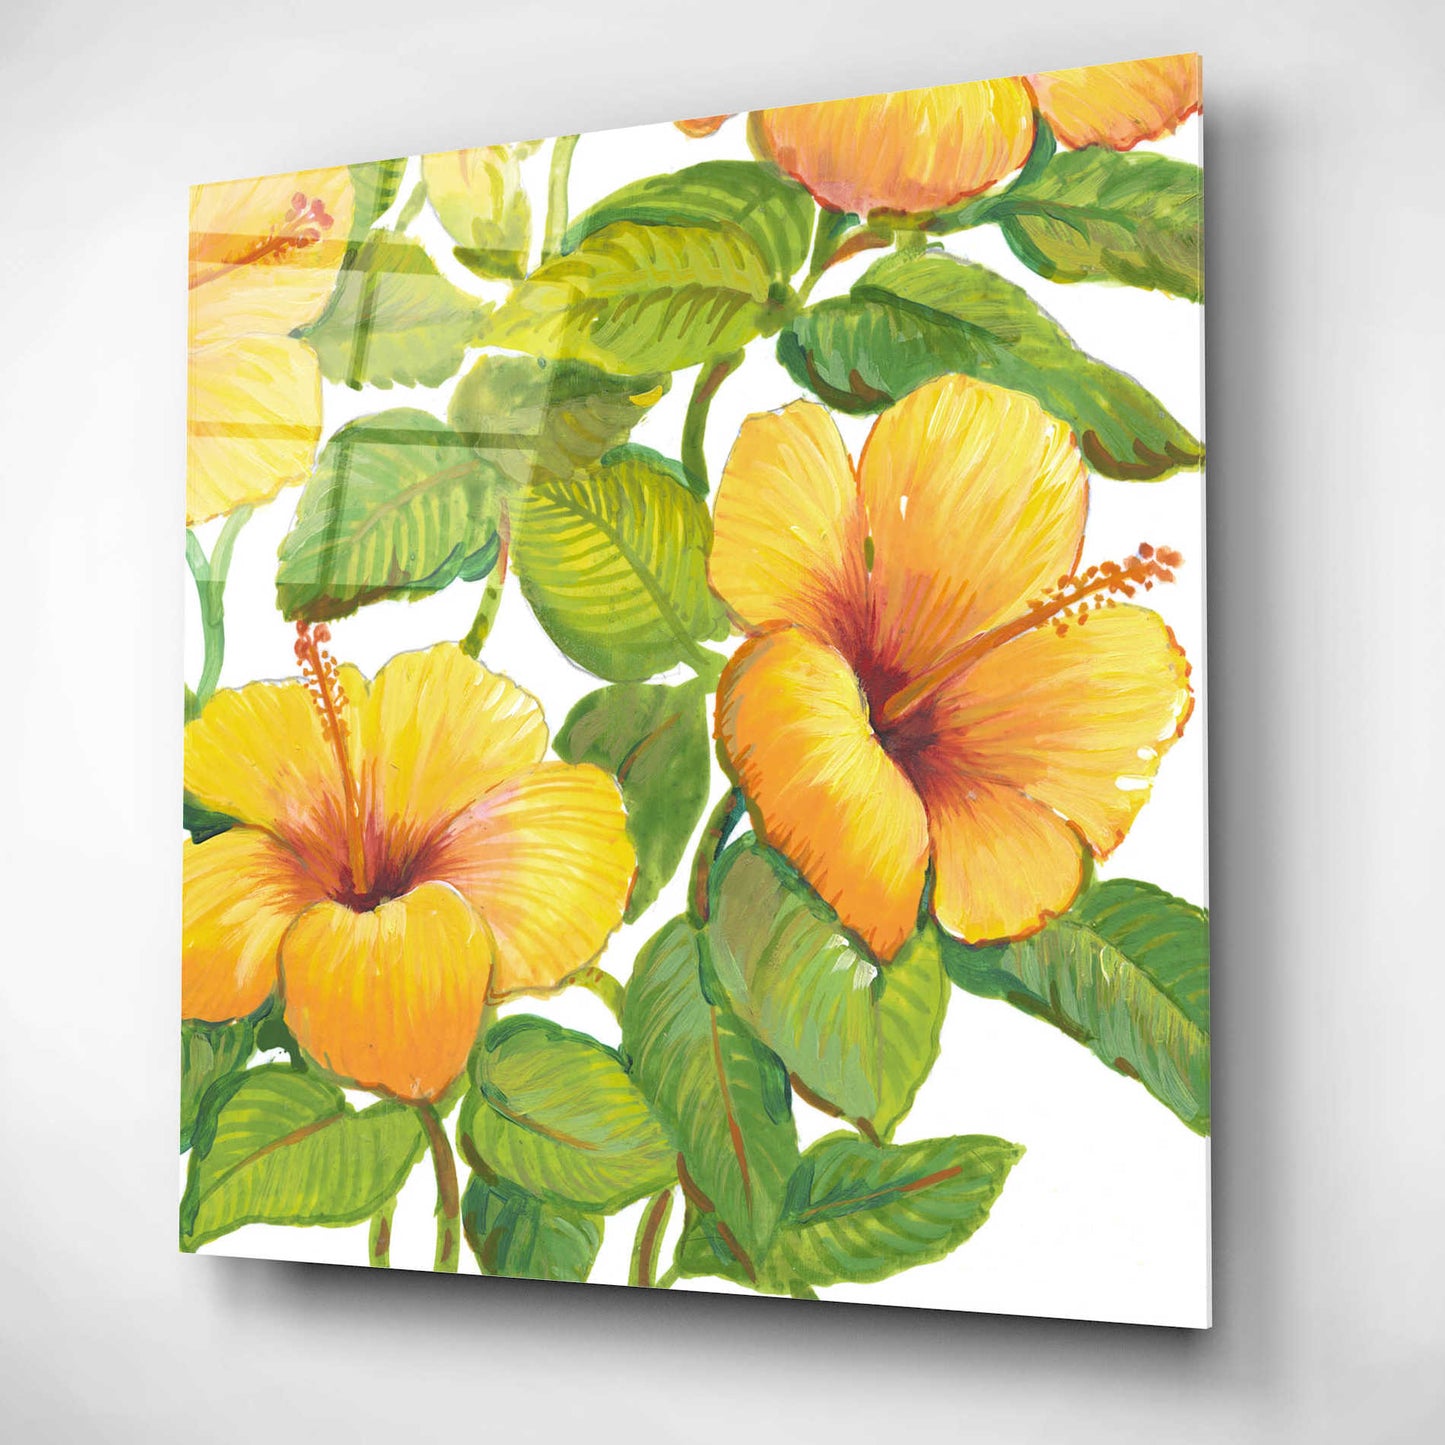 Epic Art 'Watercolor Hibiscus IV' by Tim O'Toole, Acrylic Glass Wall Art,12x12